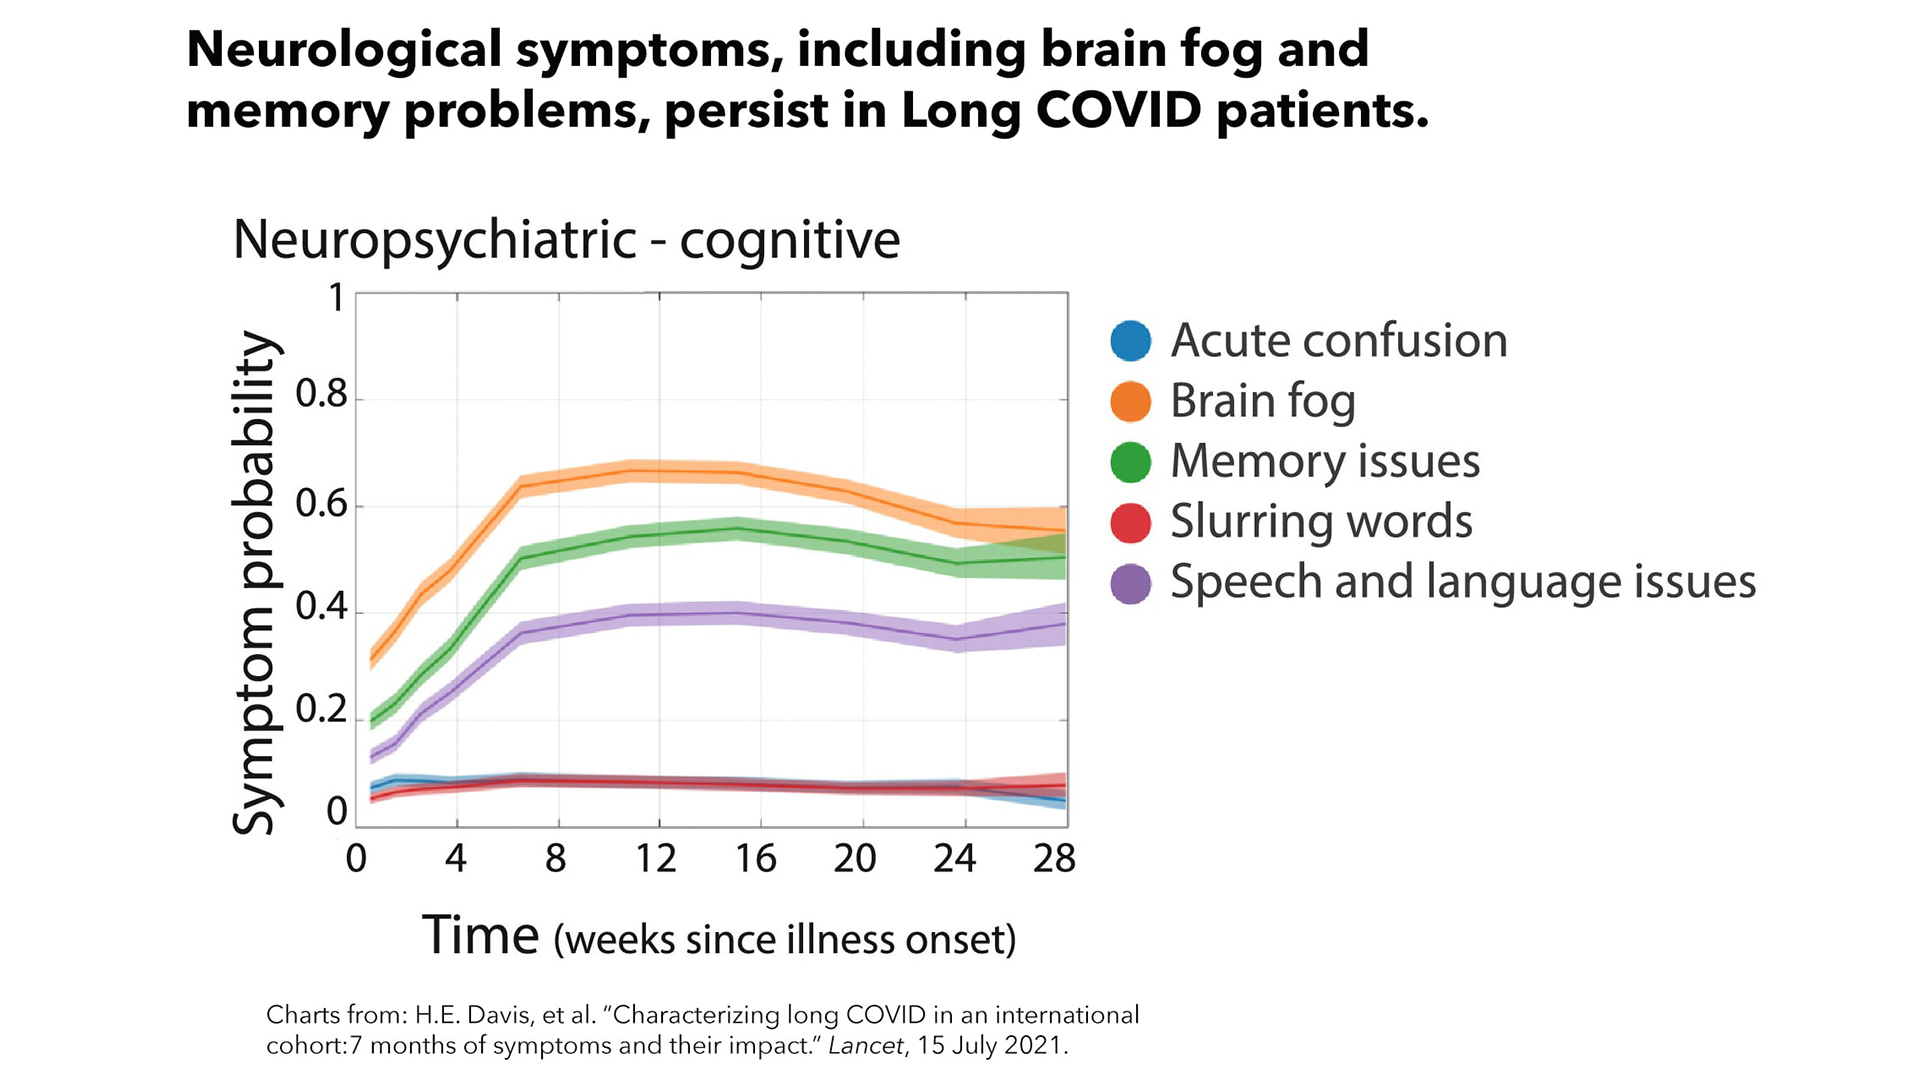 A chart titled "Neurological symptoms, including brain fog and memory problems, persist in Long COVID patients" and shows the probability of acute confusion, brain fog, memory issues, slurring words, and speech and language issues over zero to 28 weeks since illness.